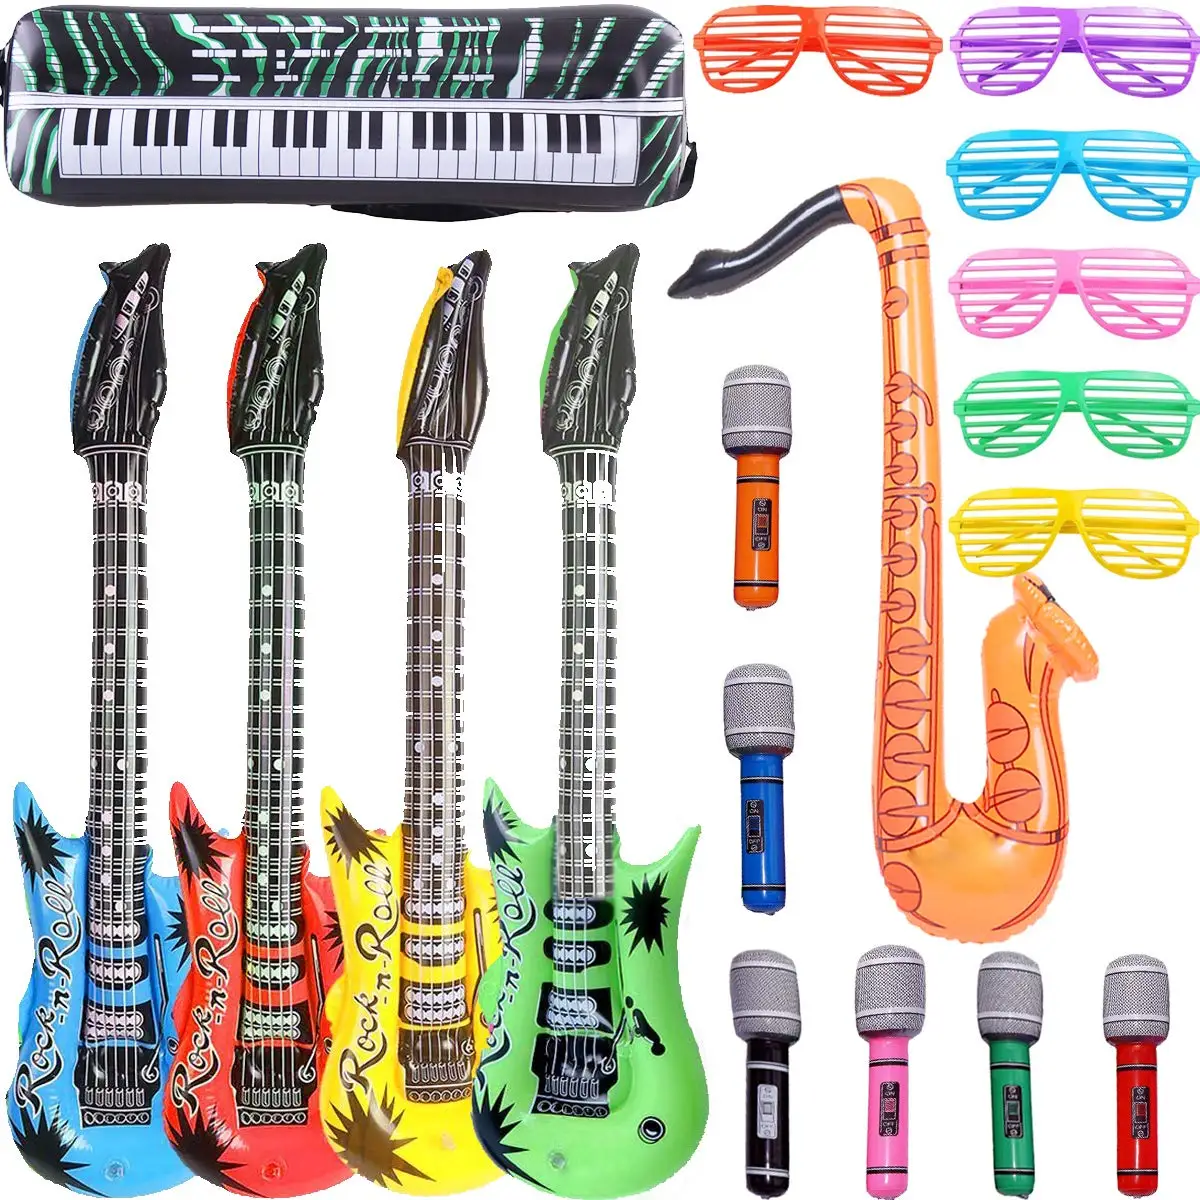 Latable party props inflate rock band assortment toy set for concert theme party favors thumb200